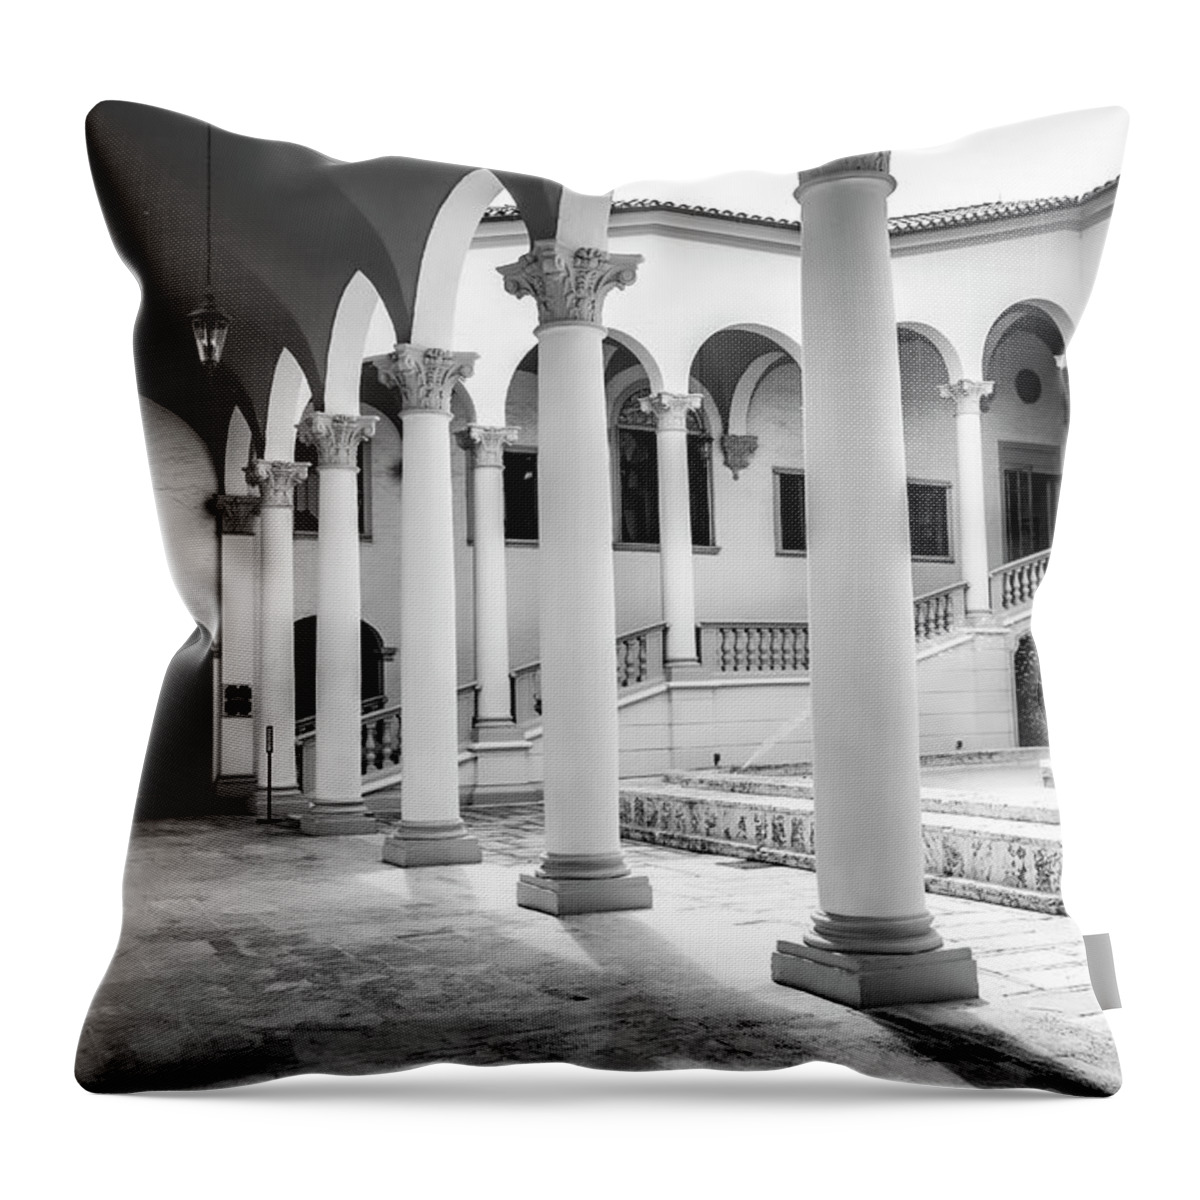 Architecture Throw Pillow featuring the photograph Biltmore Hotel in Coral Gables Series 0177 by Carlos Diaz